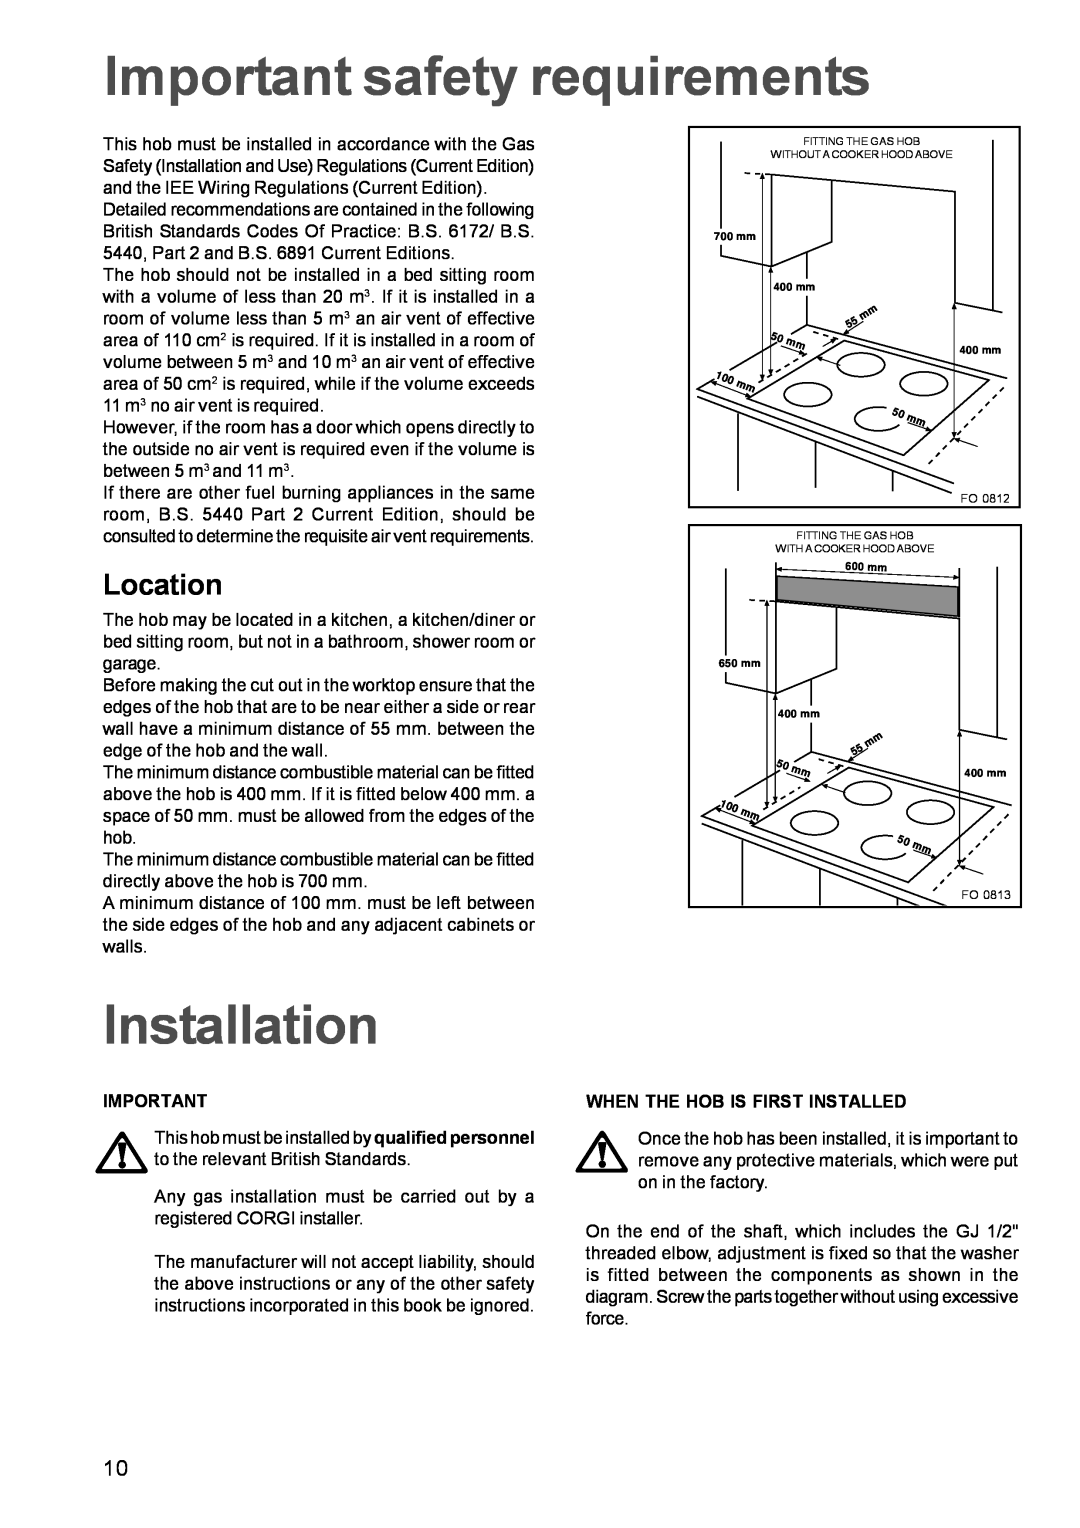 Electrolux EHG 680 manual Important safety requirements, Installation, Location 